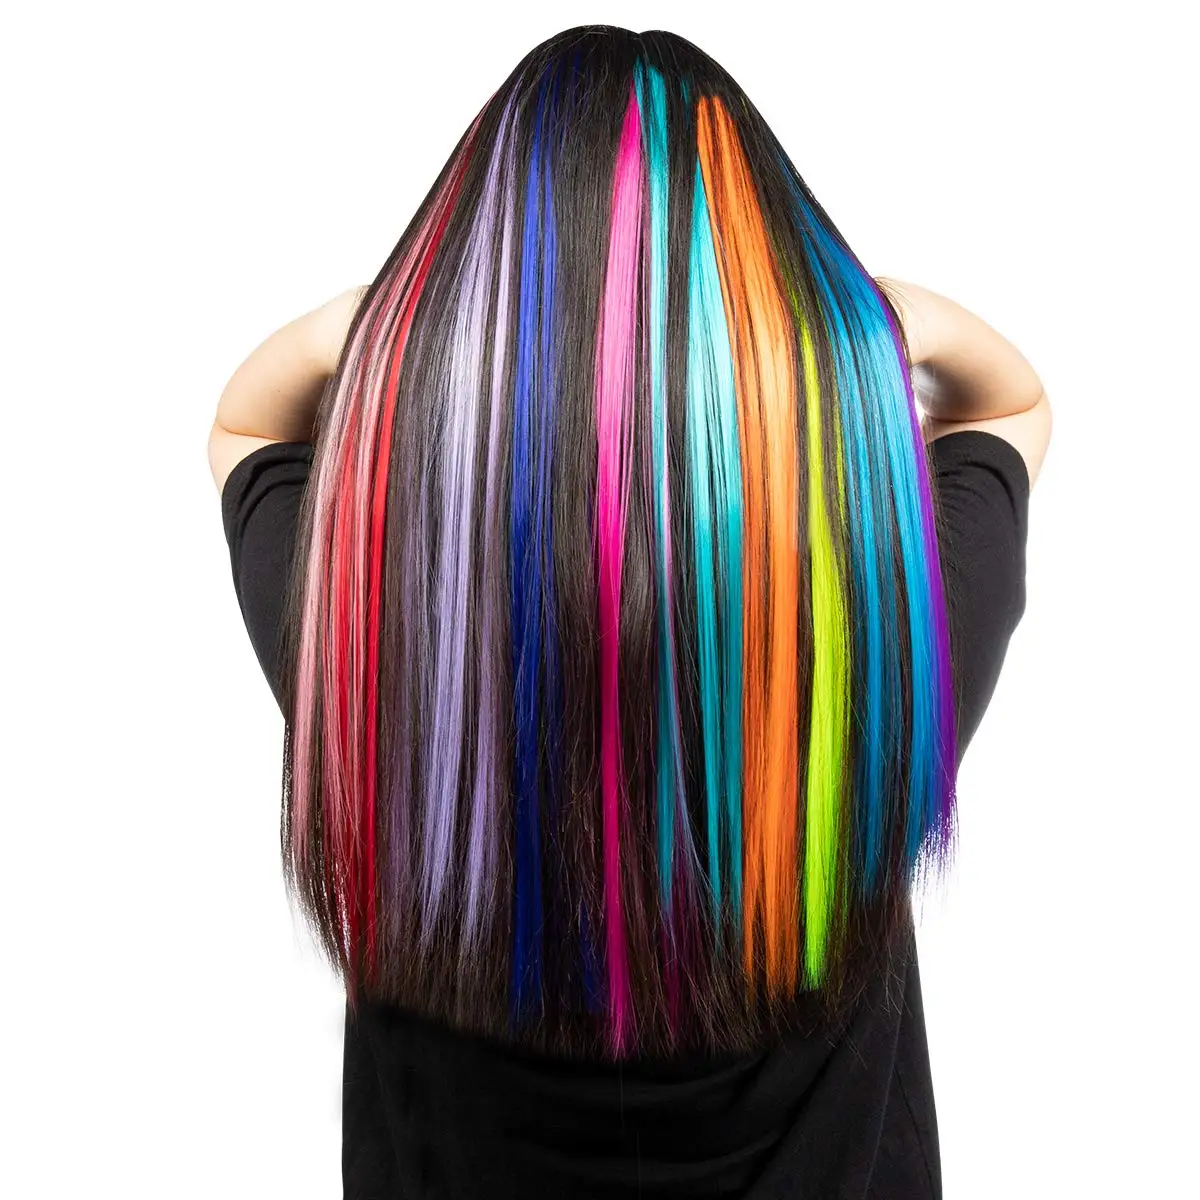 Colored Party Highlights Colorful Clip In Hair Extensions 22 Inch Straight  Synthetic Hairpieces For Women Kids Girls,Rainbow - Buy Colorful Straight  Hair,Multi-colors Party Highlights Clip In Synthetic Hair Extensions,Rainbow  Long Straight Hairpieces